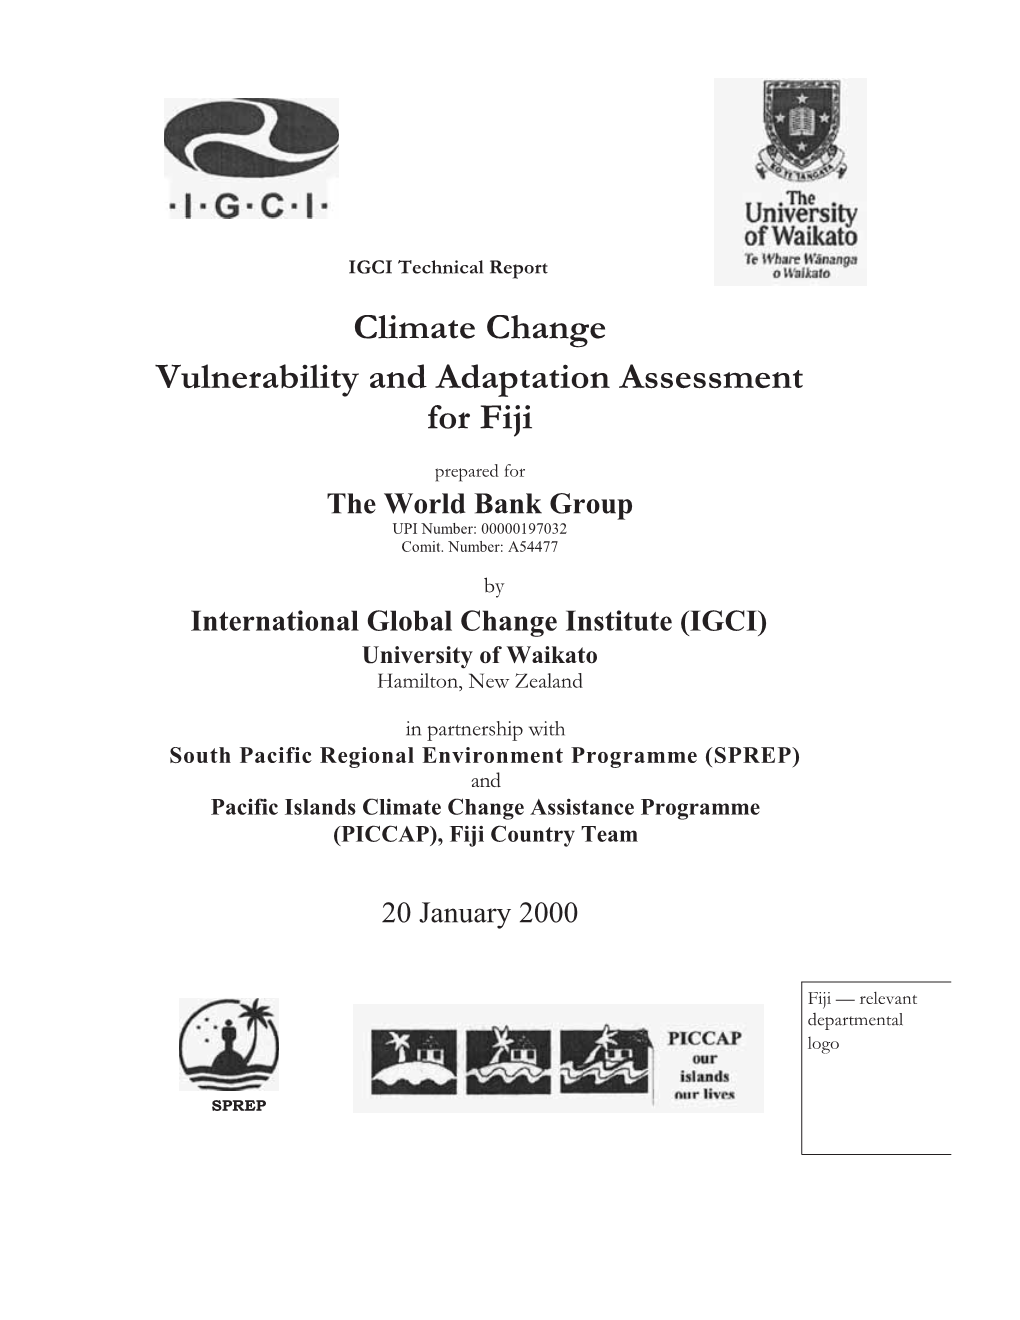 Climate Change Vulnerability and Adaptation Assessment for Fiji